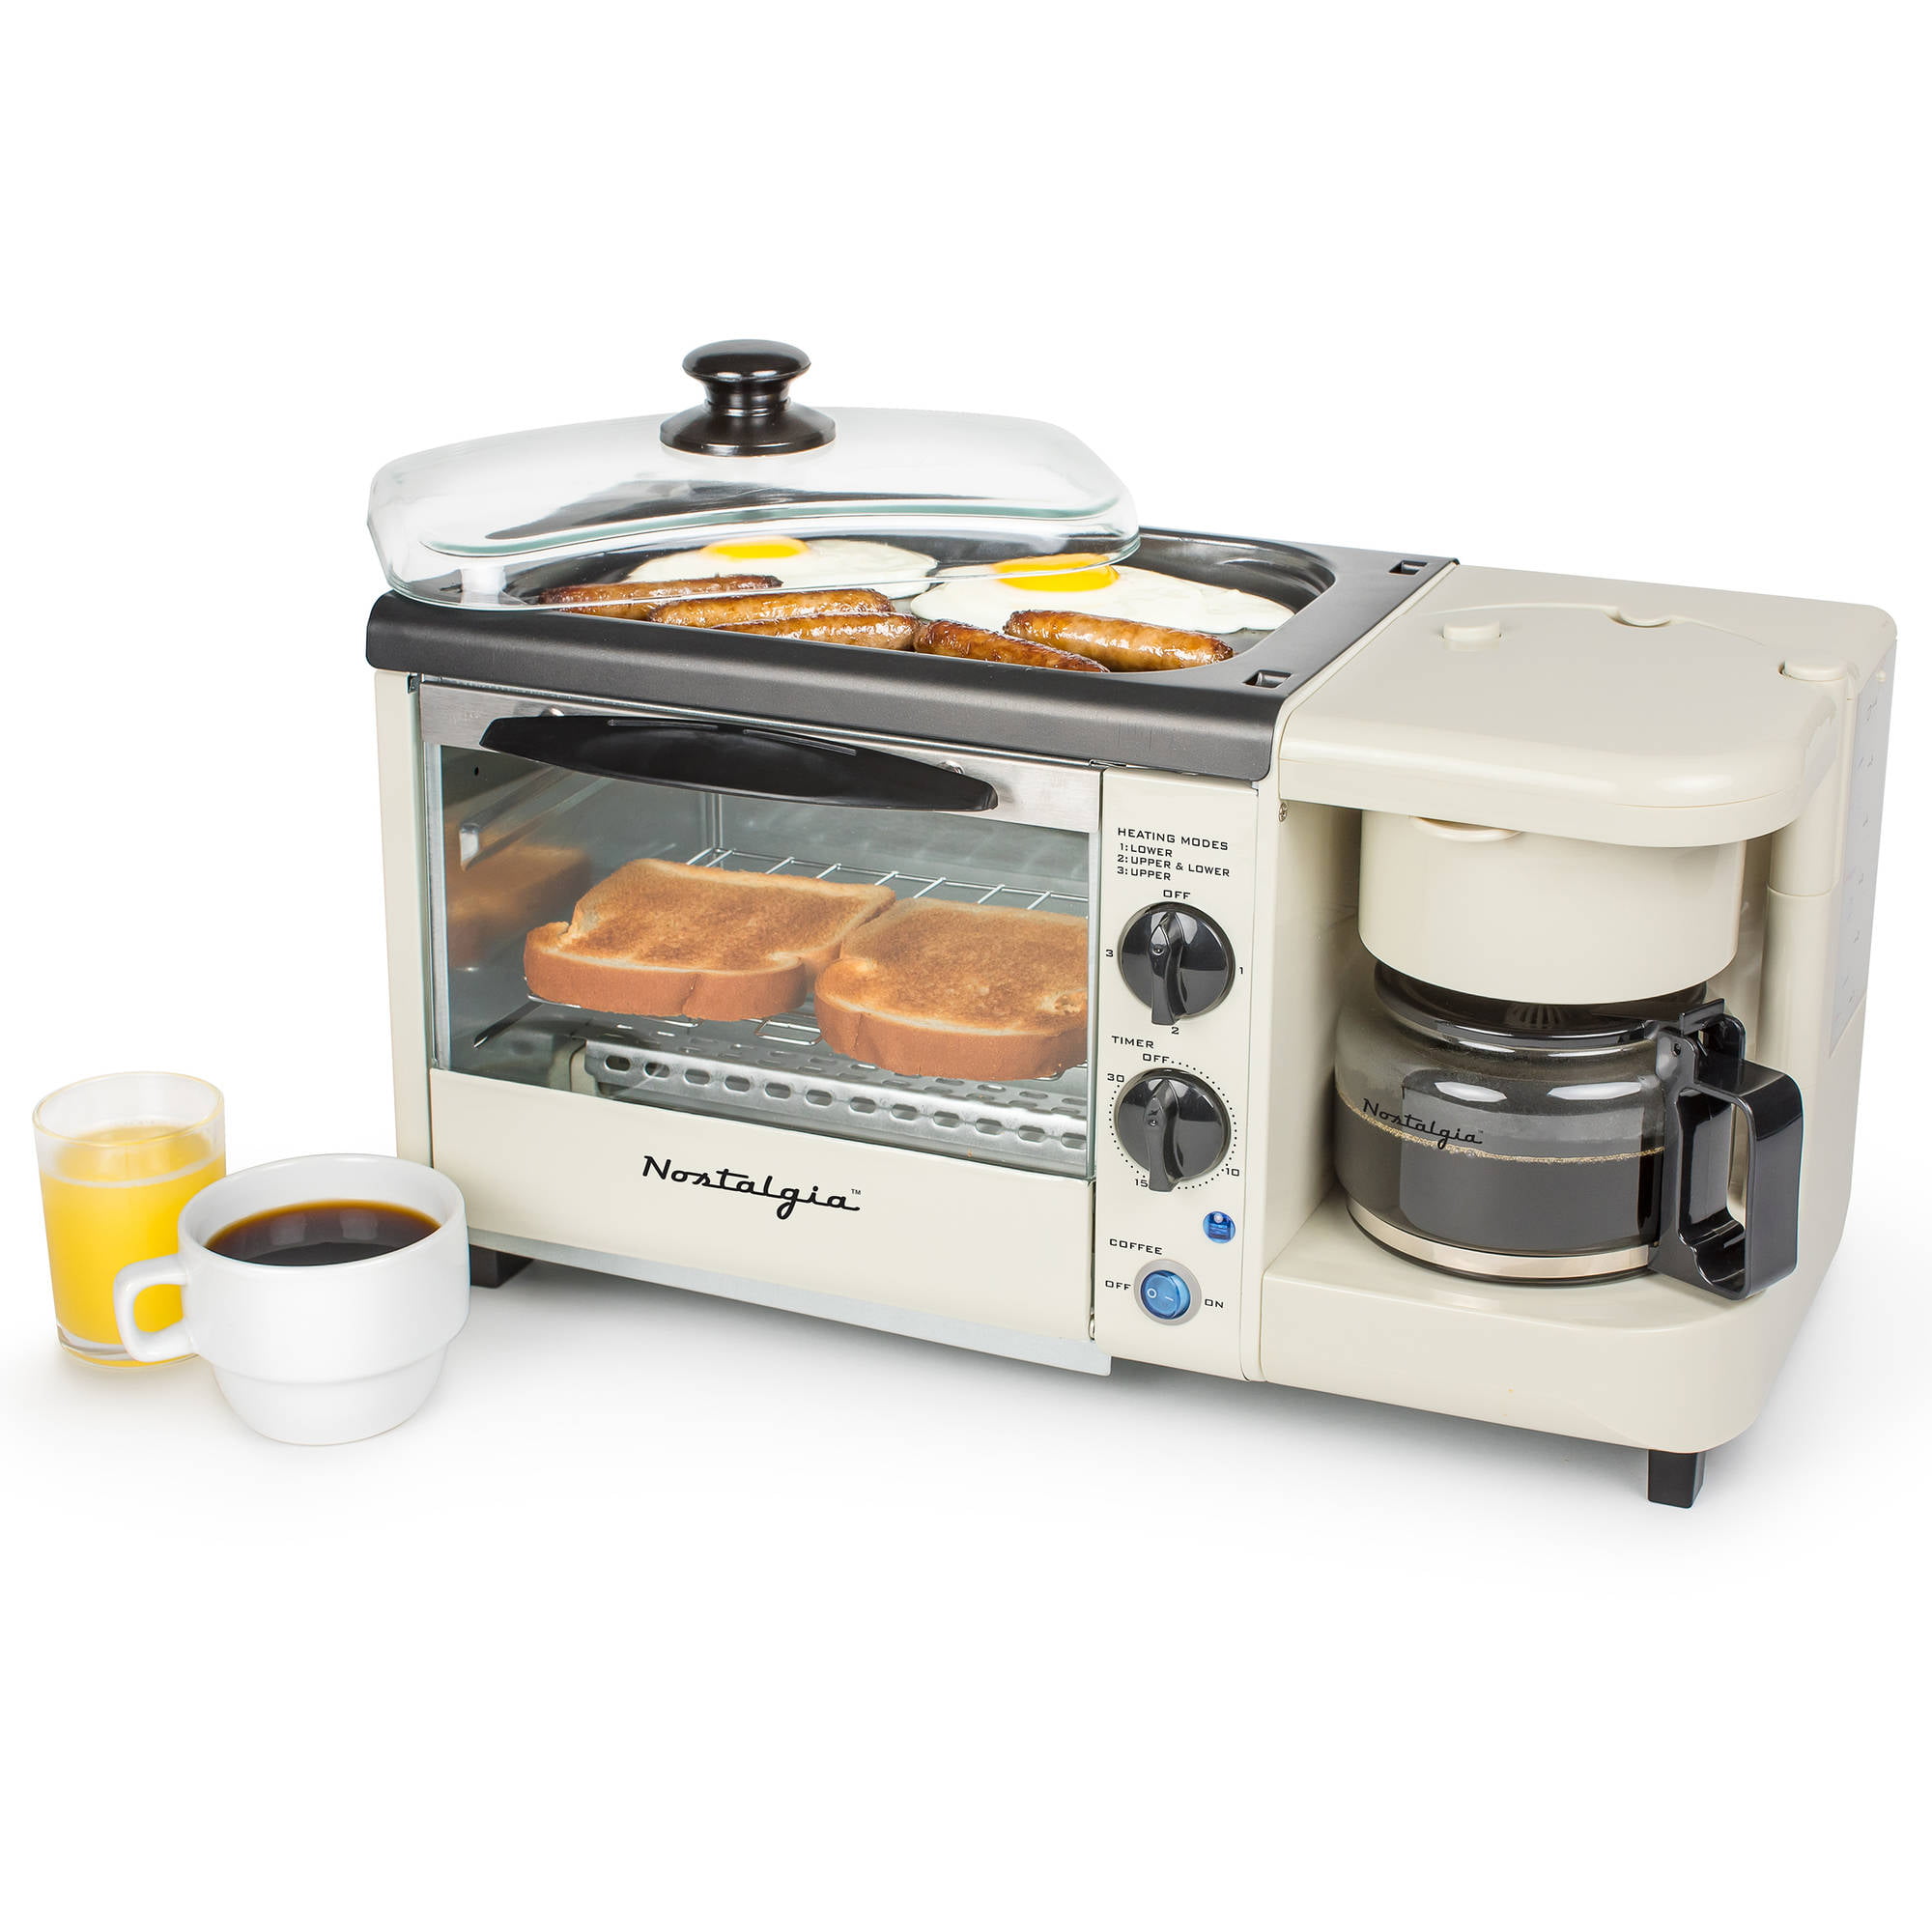 Toaster Oven Non Stick Griddle Bisque Built In Timer Breakfast Station 3-in-1